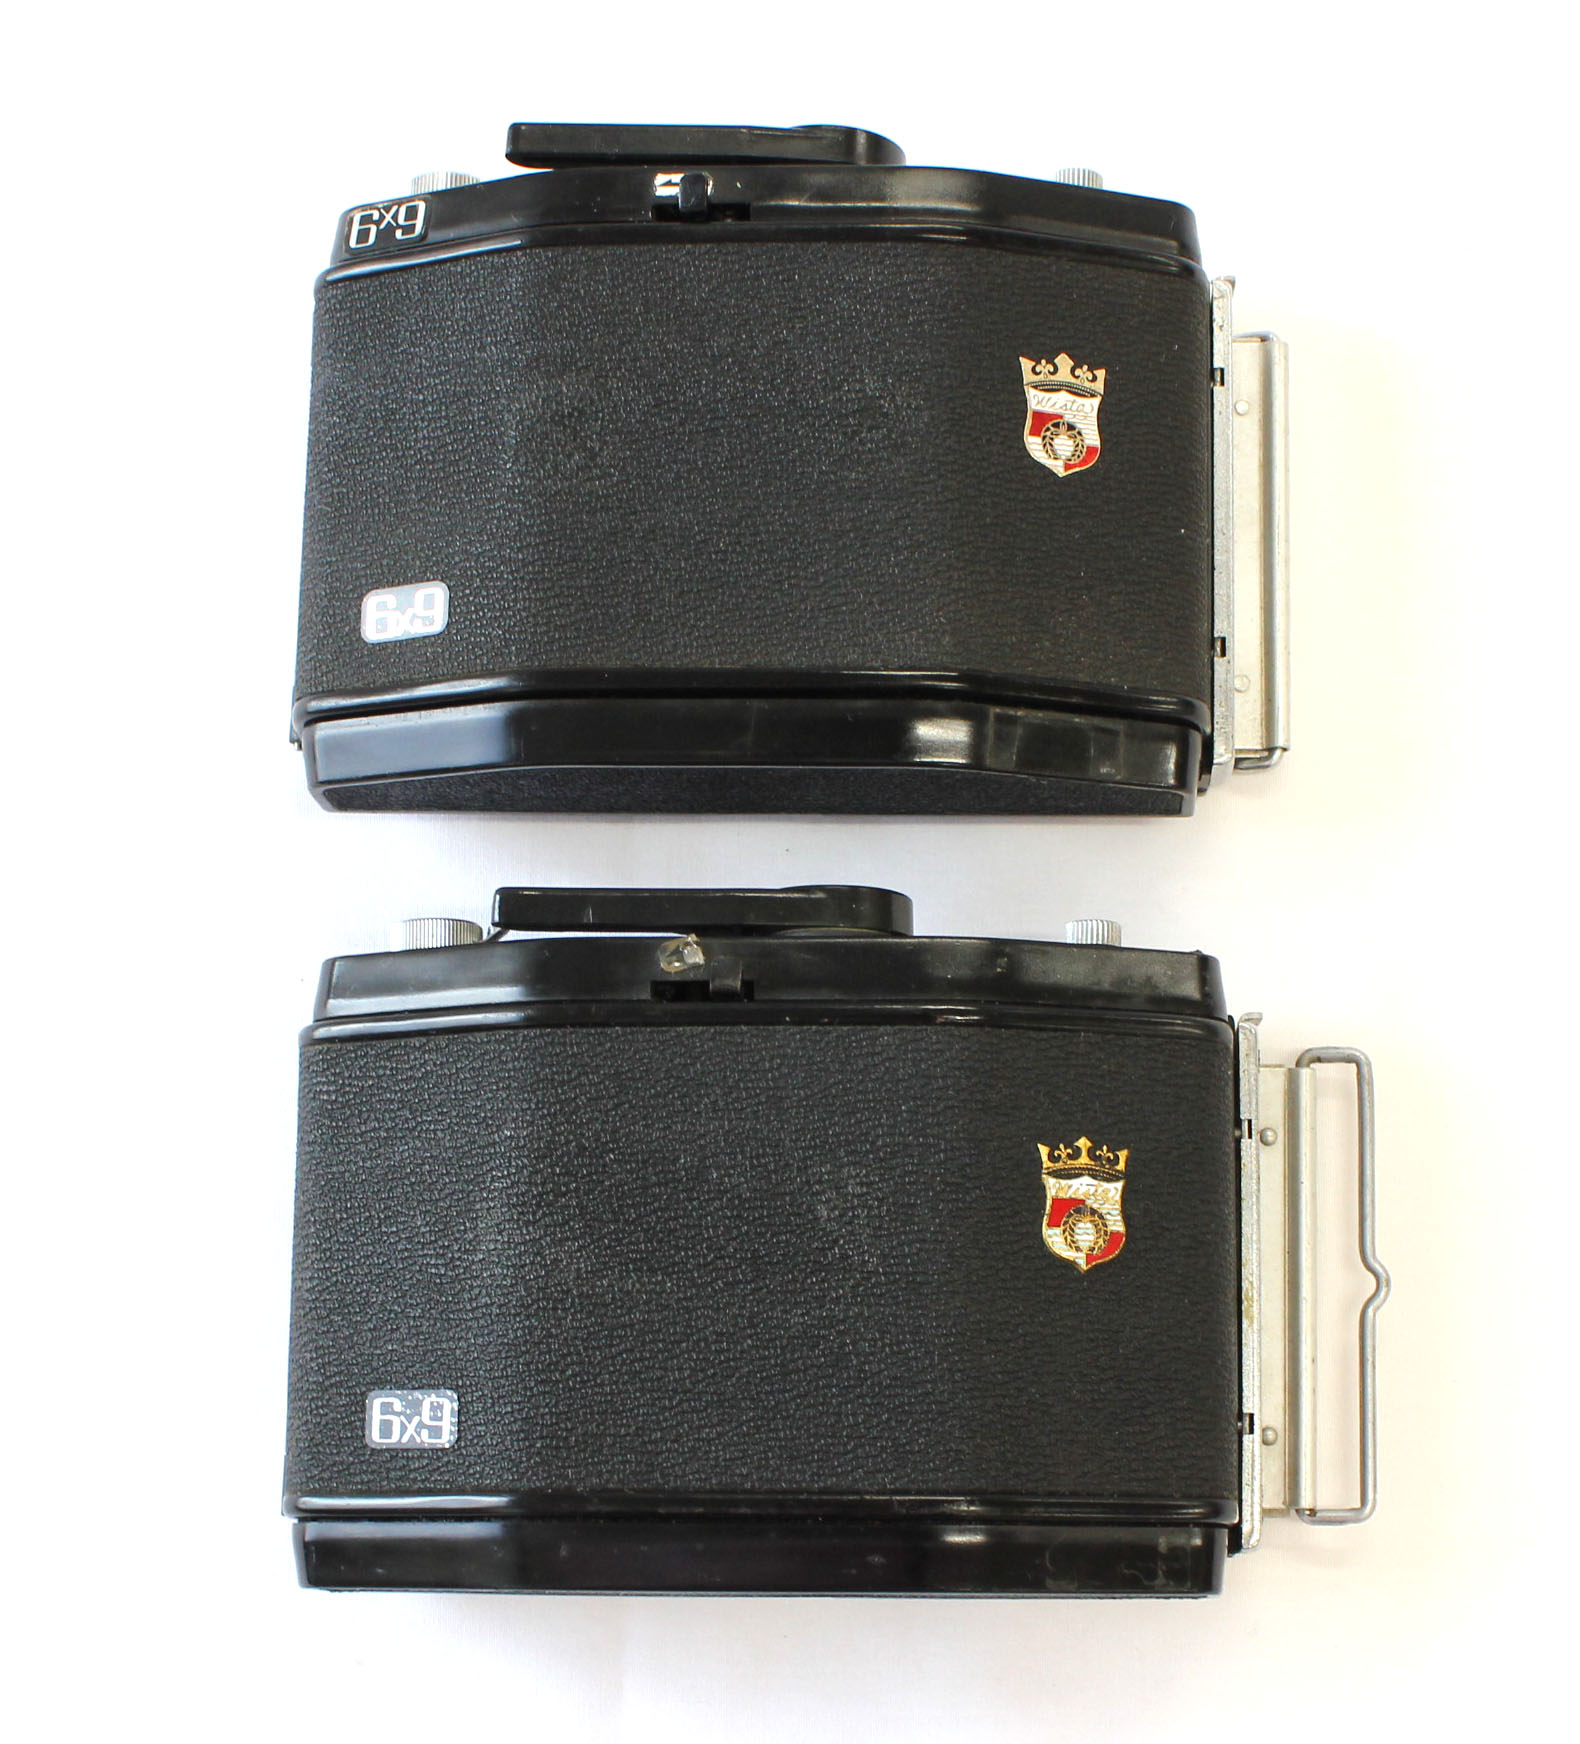 Set of 2 - Wista 6x9 Roll Film Back Holder 120/220 from Japan